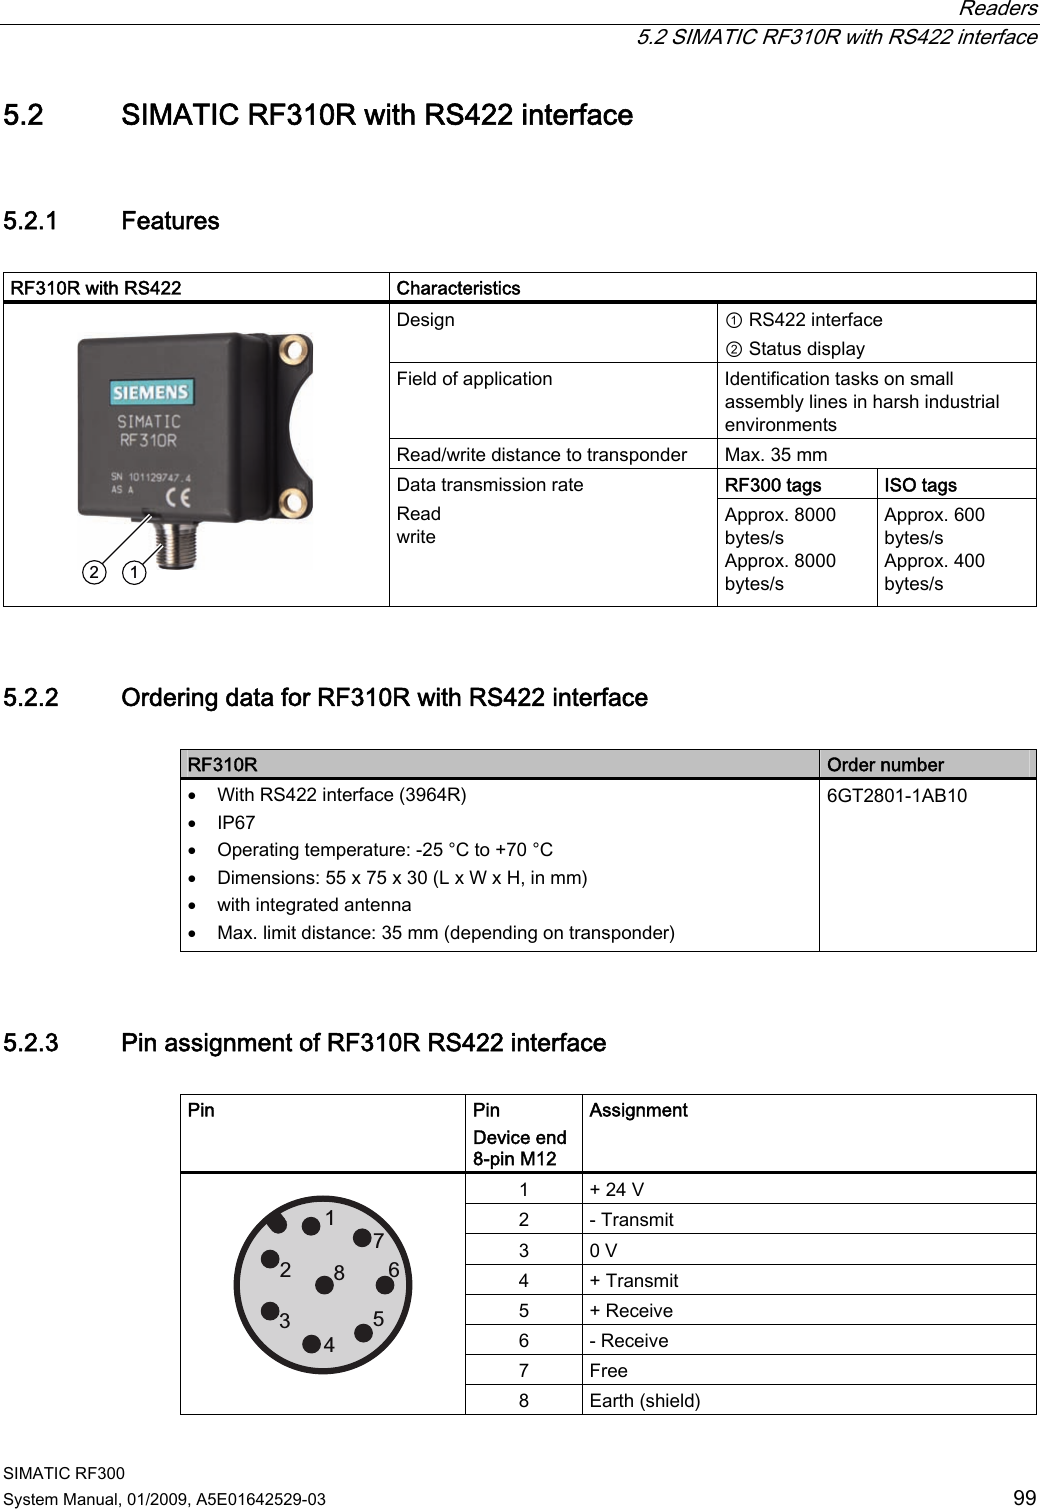  Readers   5.2 SIMATIC RF310R with RS422 interface SIMATIC RF300 System Manual, 01/2009, A5E01642529-03  99 5.2 SIMATIC RF310R with RS422 interface 5.2.1 Features  RF310R with RS422     Characteristics Design  ① RS422 interface ② Status display Field of application  Identification tasks on small assembly lines in harsh industrial environments Read/write distance to transponder  Max. 35 mm RF300 tags ISO tags    Data transmission rate Read write Approx. 8000 bytes/s Approx. 8000 bytes/s Approx. 600 bytes/s Approx. 400 bytes/s 5.2.2 Ordering data for RF310R with RS422 interface  RF310R  Order number • With RS422 interface (3964R) • IP67 • Operating temperature: -25 °C to +70 °C • Dimensions: 55 x 75 x 30 (L x W x H, in mm) • with integrated antenna • Max. limit distance: 35 mm (depending on transponder) 6GT2801-1AB10 5.2.3 Pin assignment of RF310R RS422 interface  Pin  Pin Device end 8-pin M12 Assignment 1  + 24 V 2  - Transmit 3  0 V 4  + Transmit 5  + Receive 6  - Receive 7  Free    8  Earth (shield) 